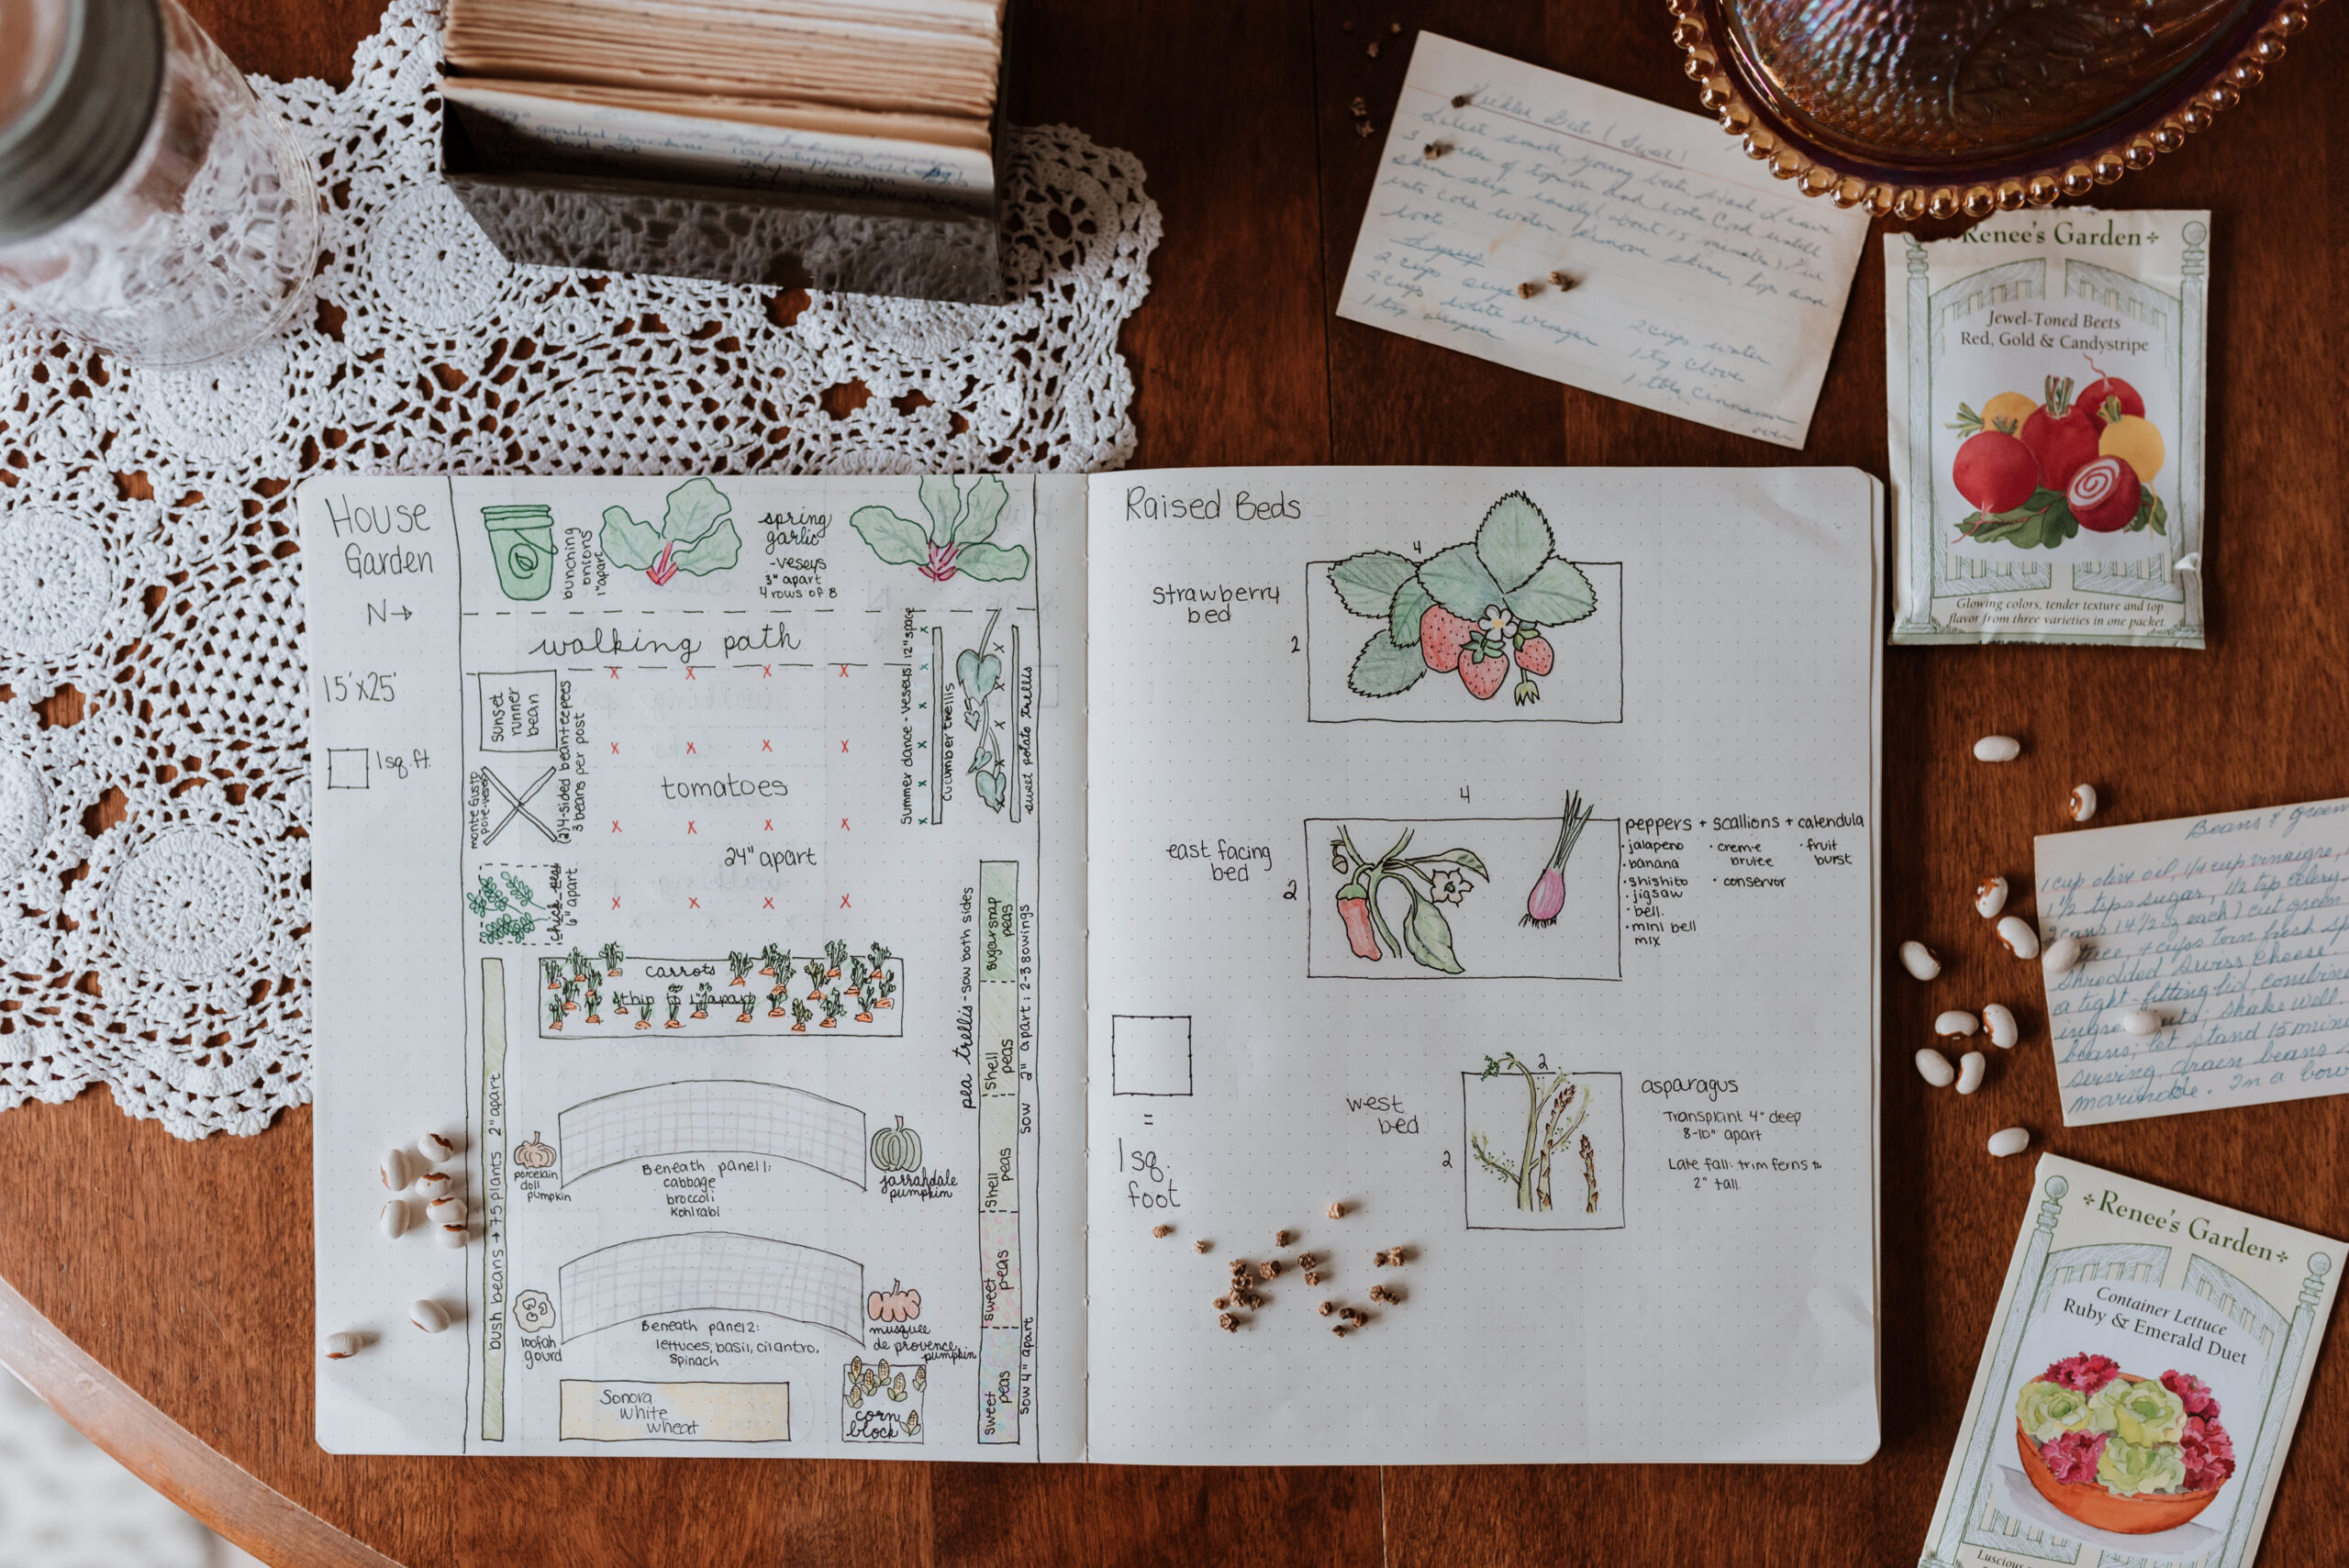 An open notebook with a detailed hand-drawn garden plan, including plant illustrations and notes.